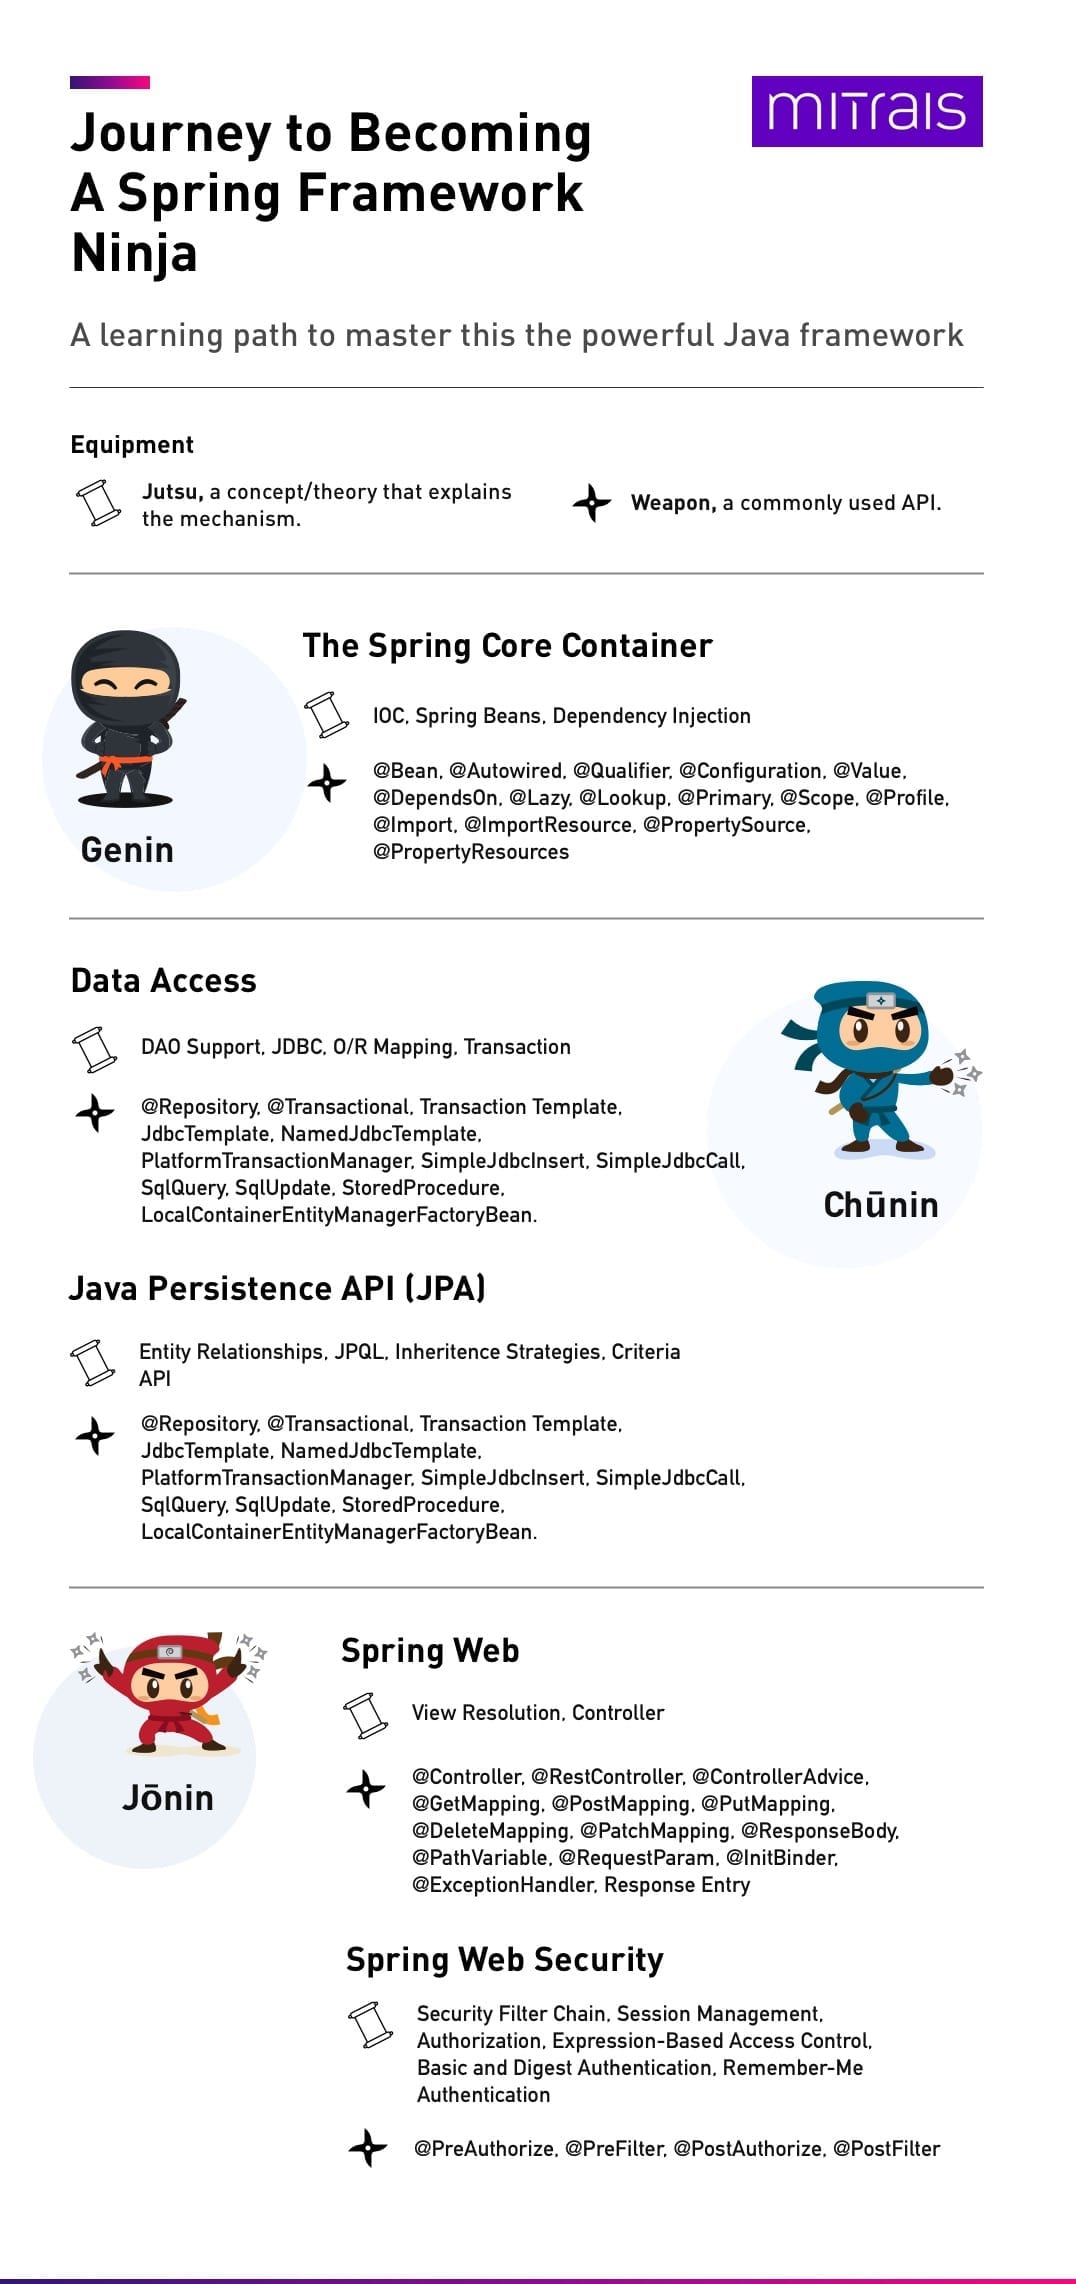 Journey to Becoming A Spring Framework Ninja infographic